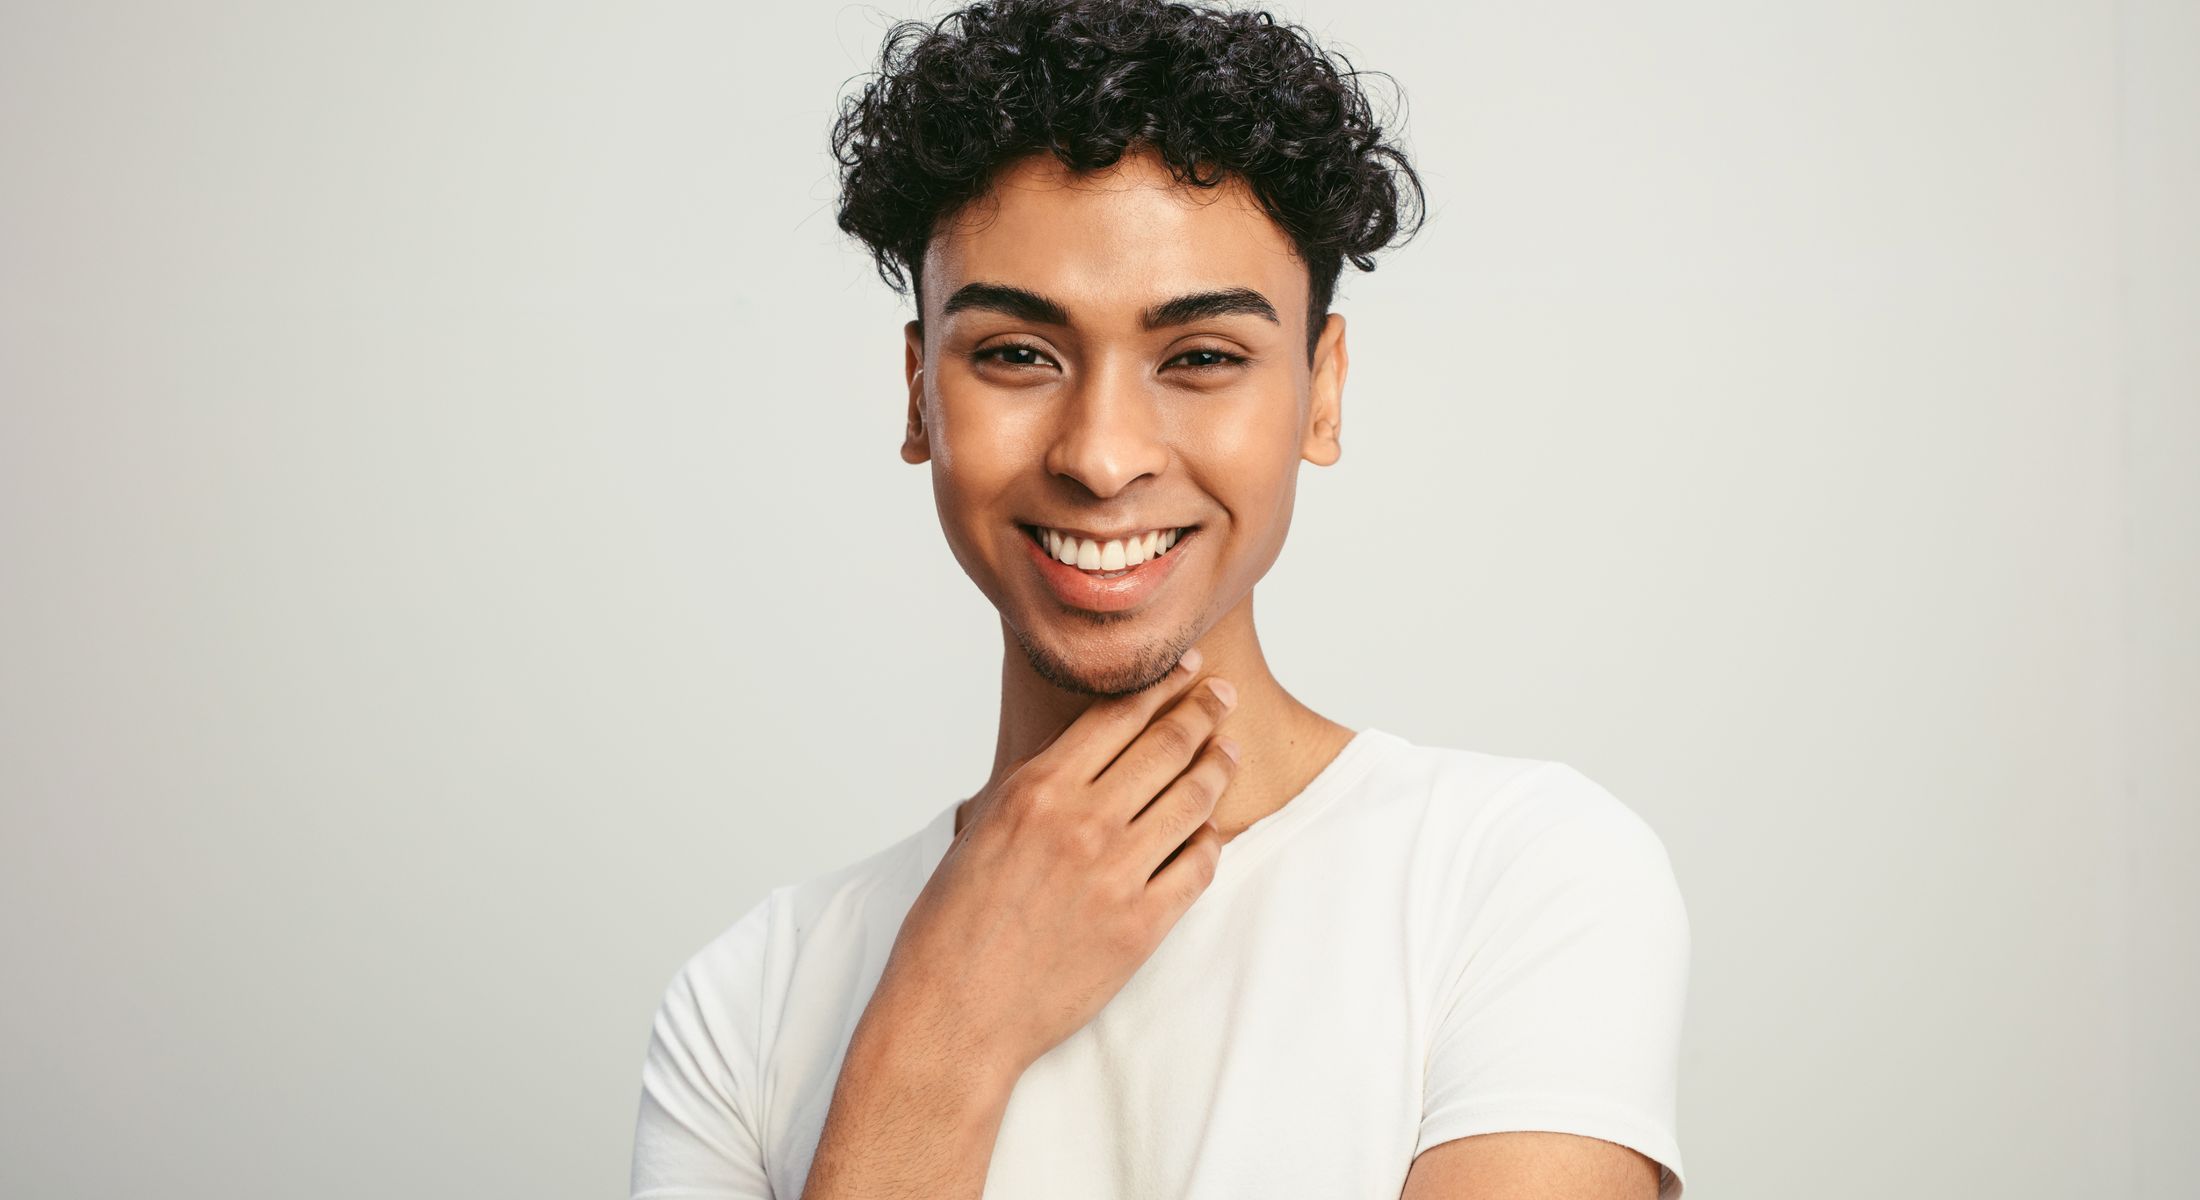 San Francisco Hair Transplant model with curly hair